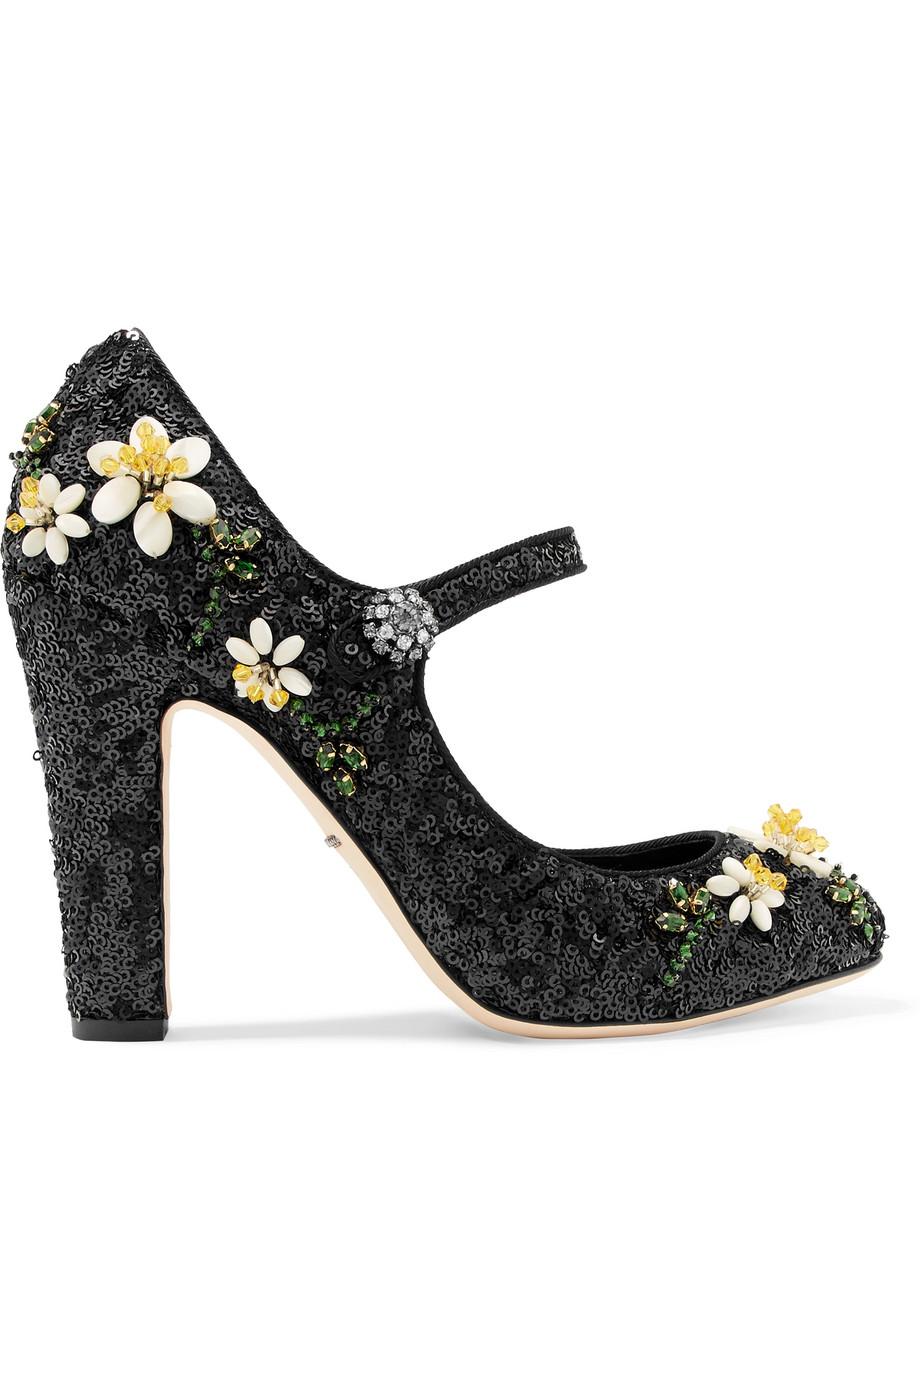 Dolce & Gabbana Bead And Sequin-embellished Leather Pumps | ModeSens